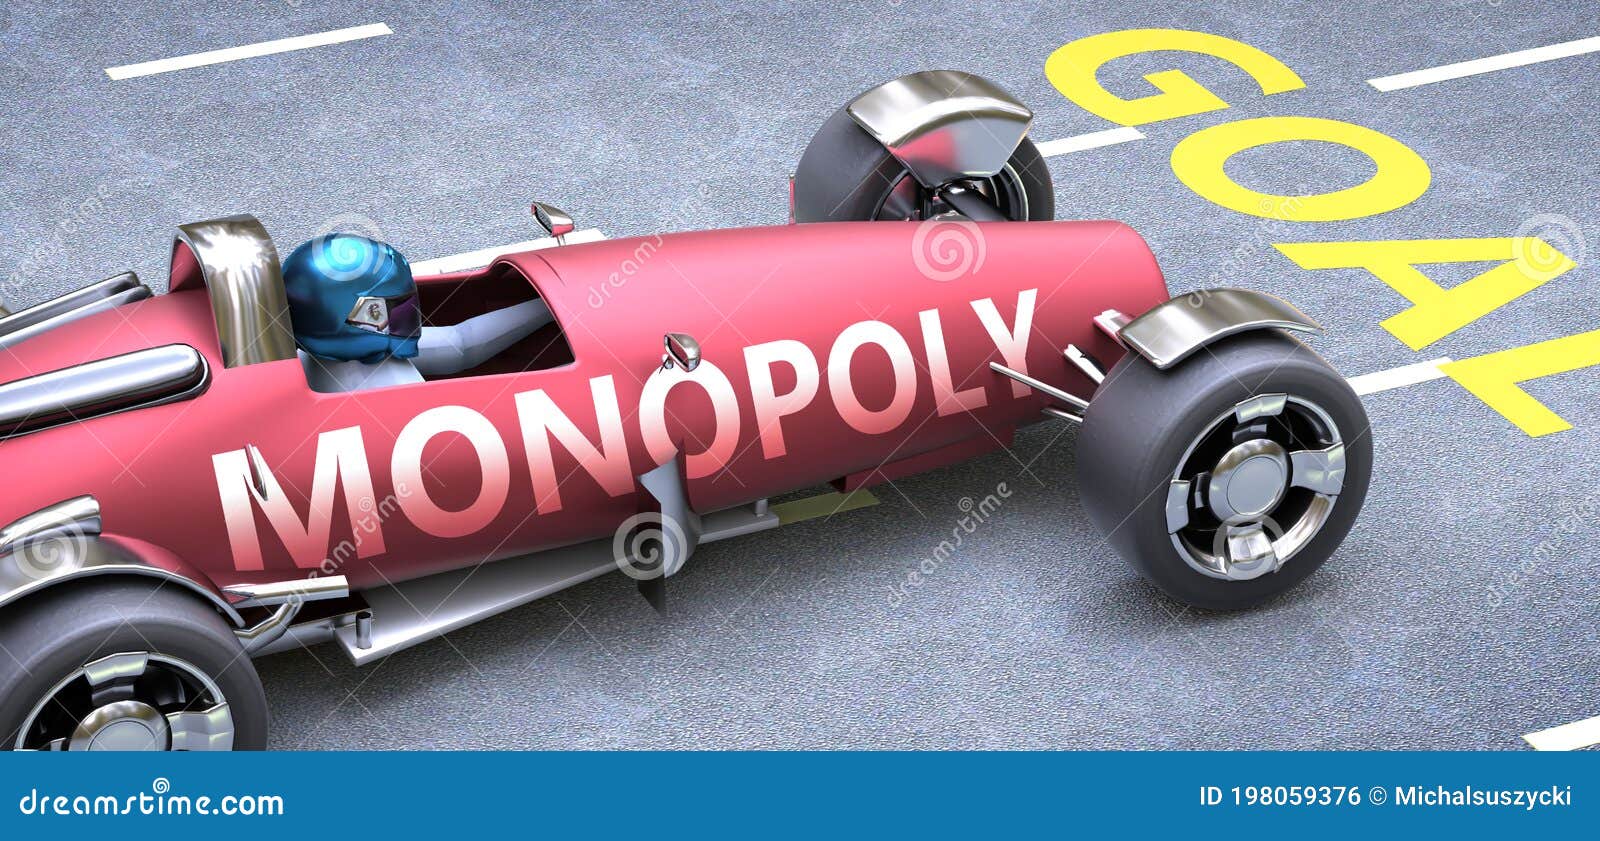 Monopoly Helps Reaching Goals Pictured As A Race Car With A Phrase 